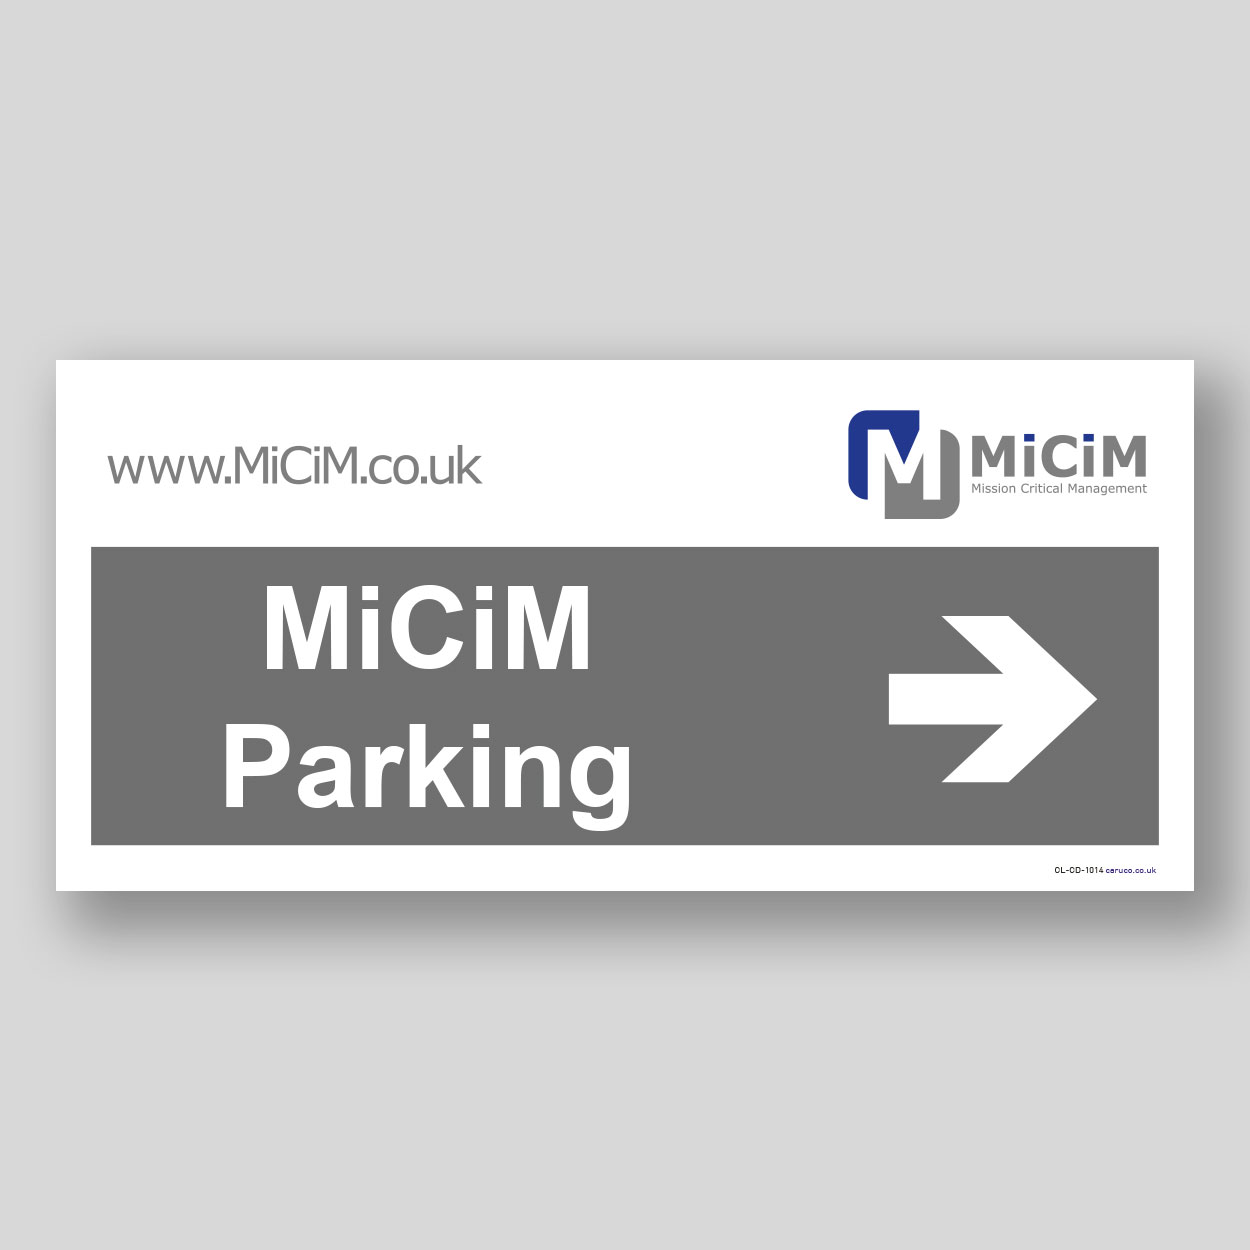 CL-CD-1014 MiCiM parking with right arrow